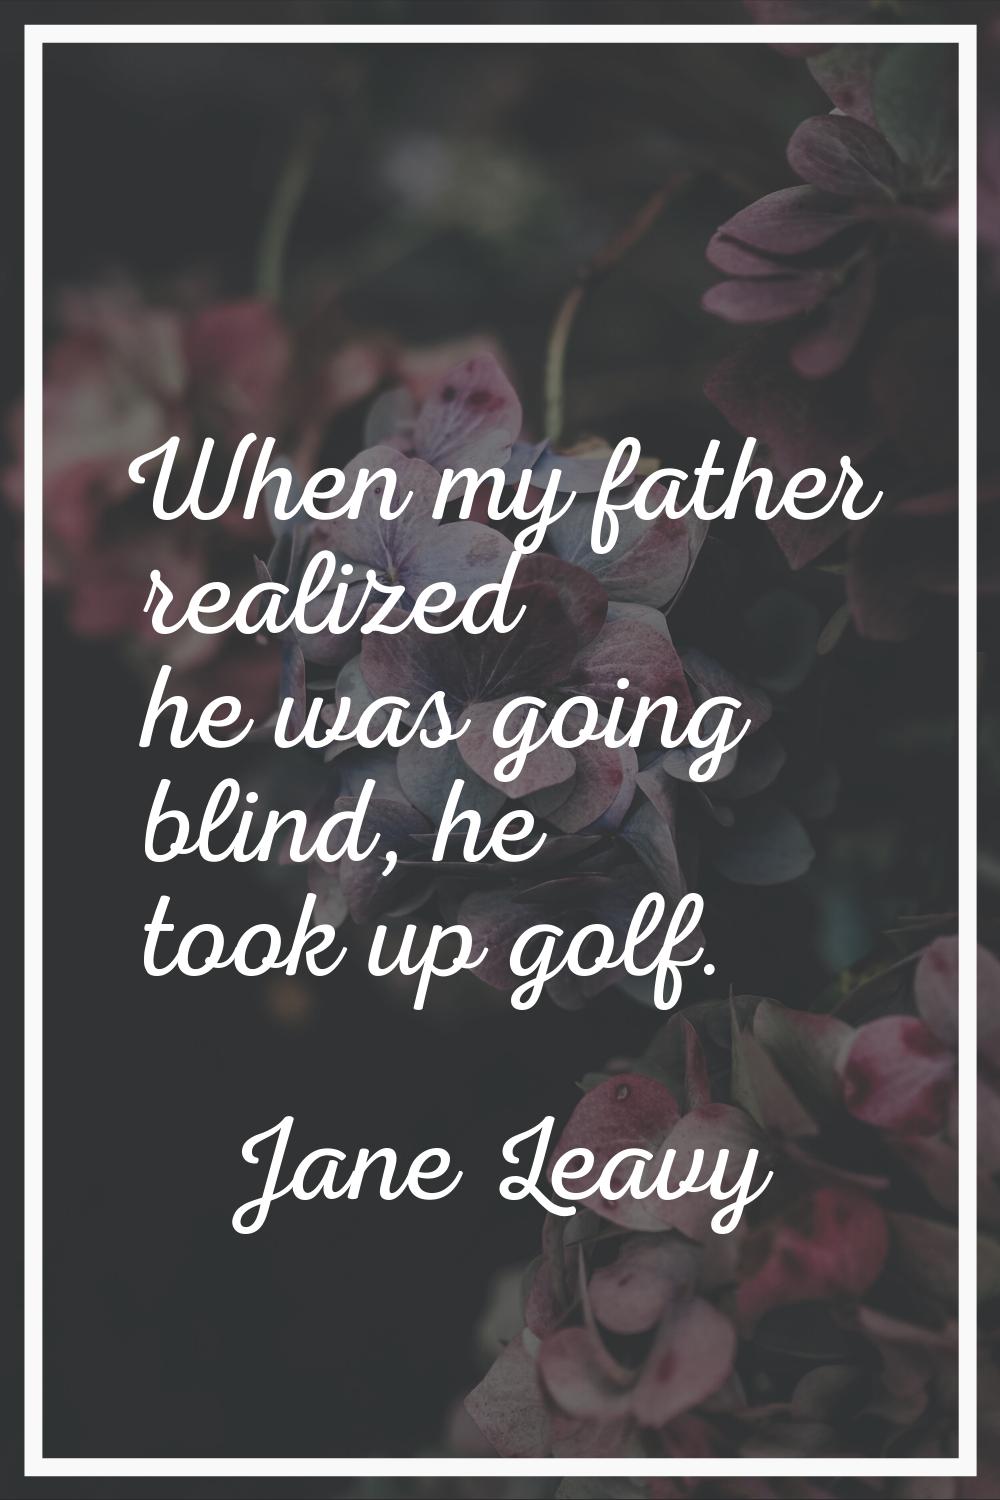 When my father realized he was going blind, he took up golf.